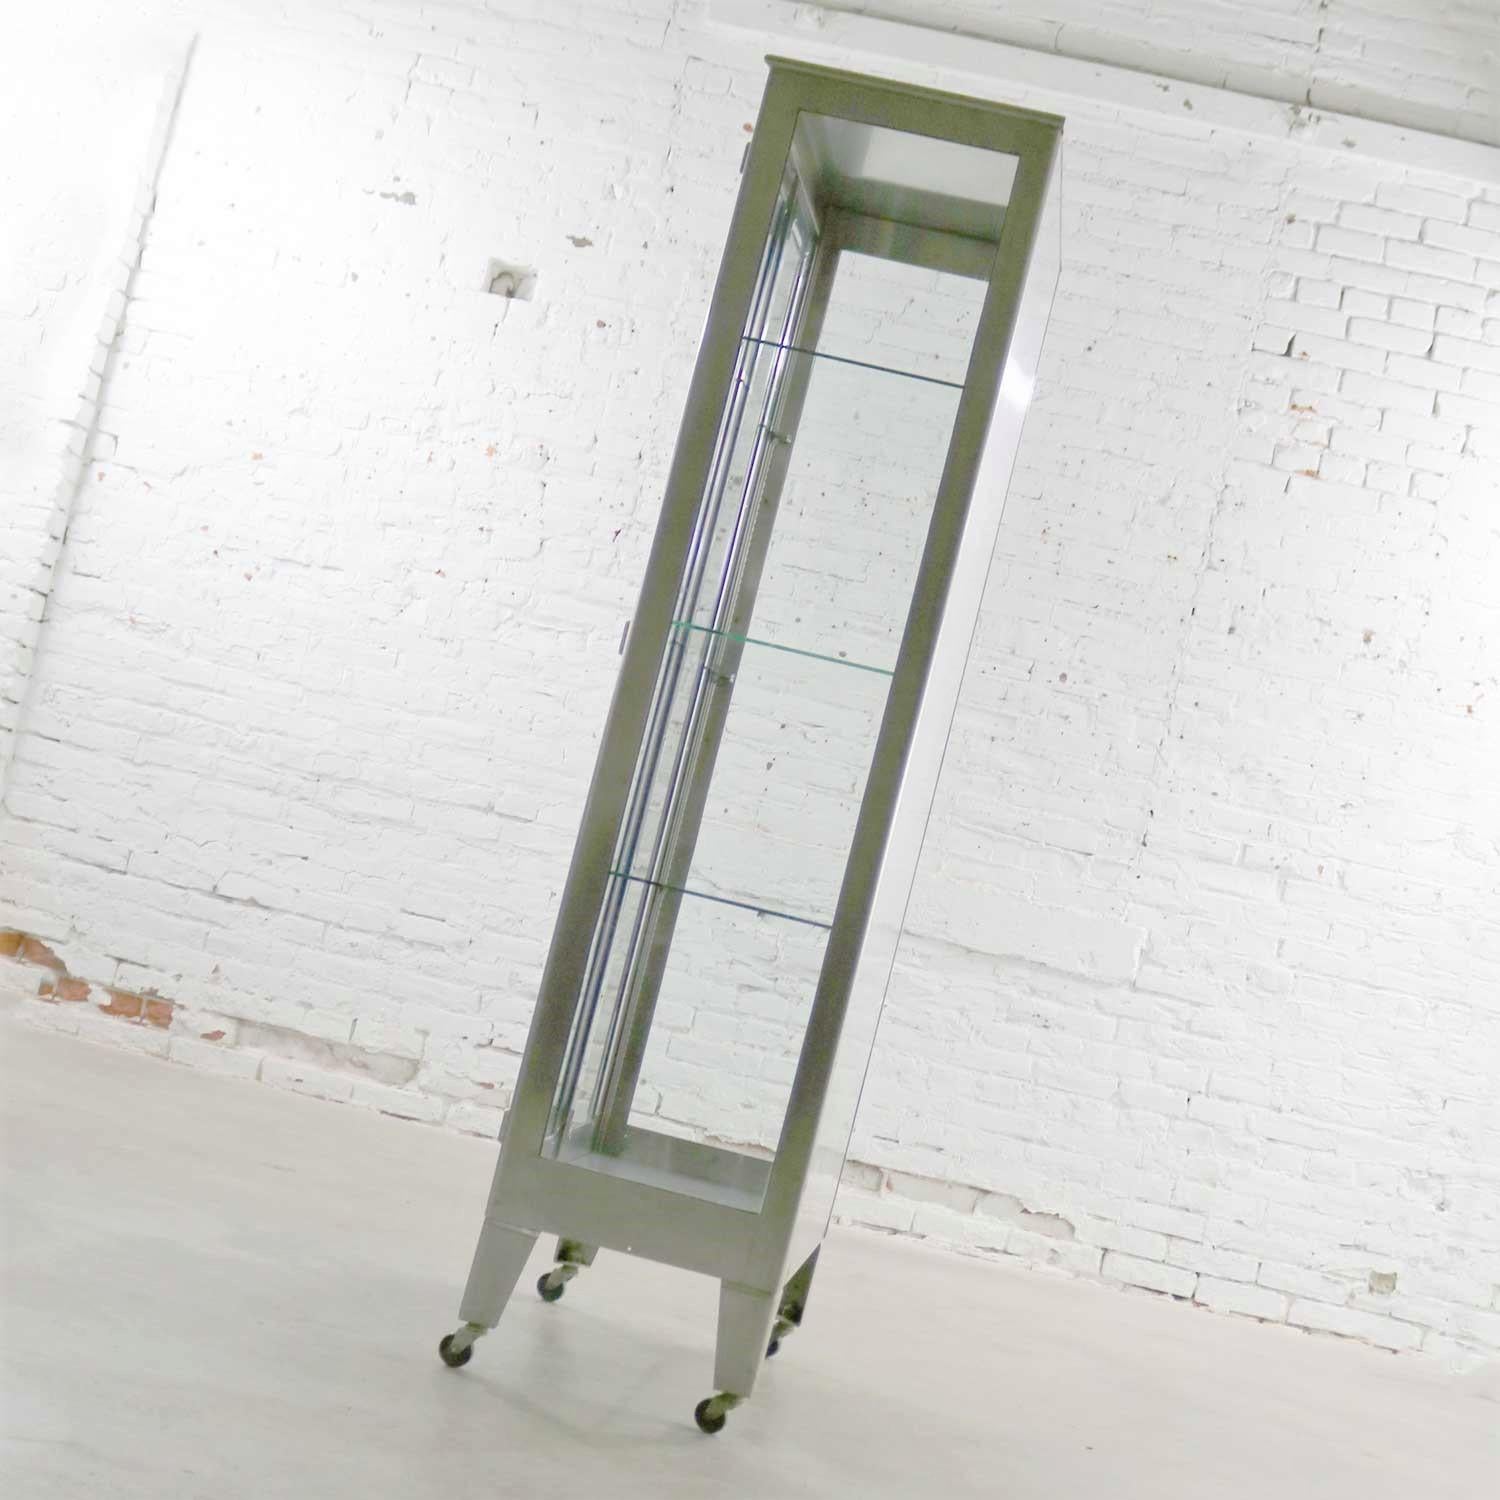 Vintage Stainless-Steel Industrial Display Apothecary Medical Cabinet with Glass 4